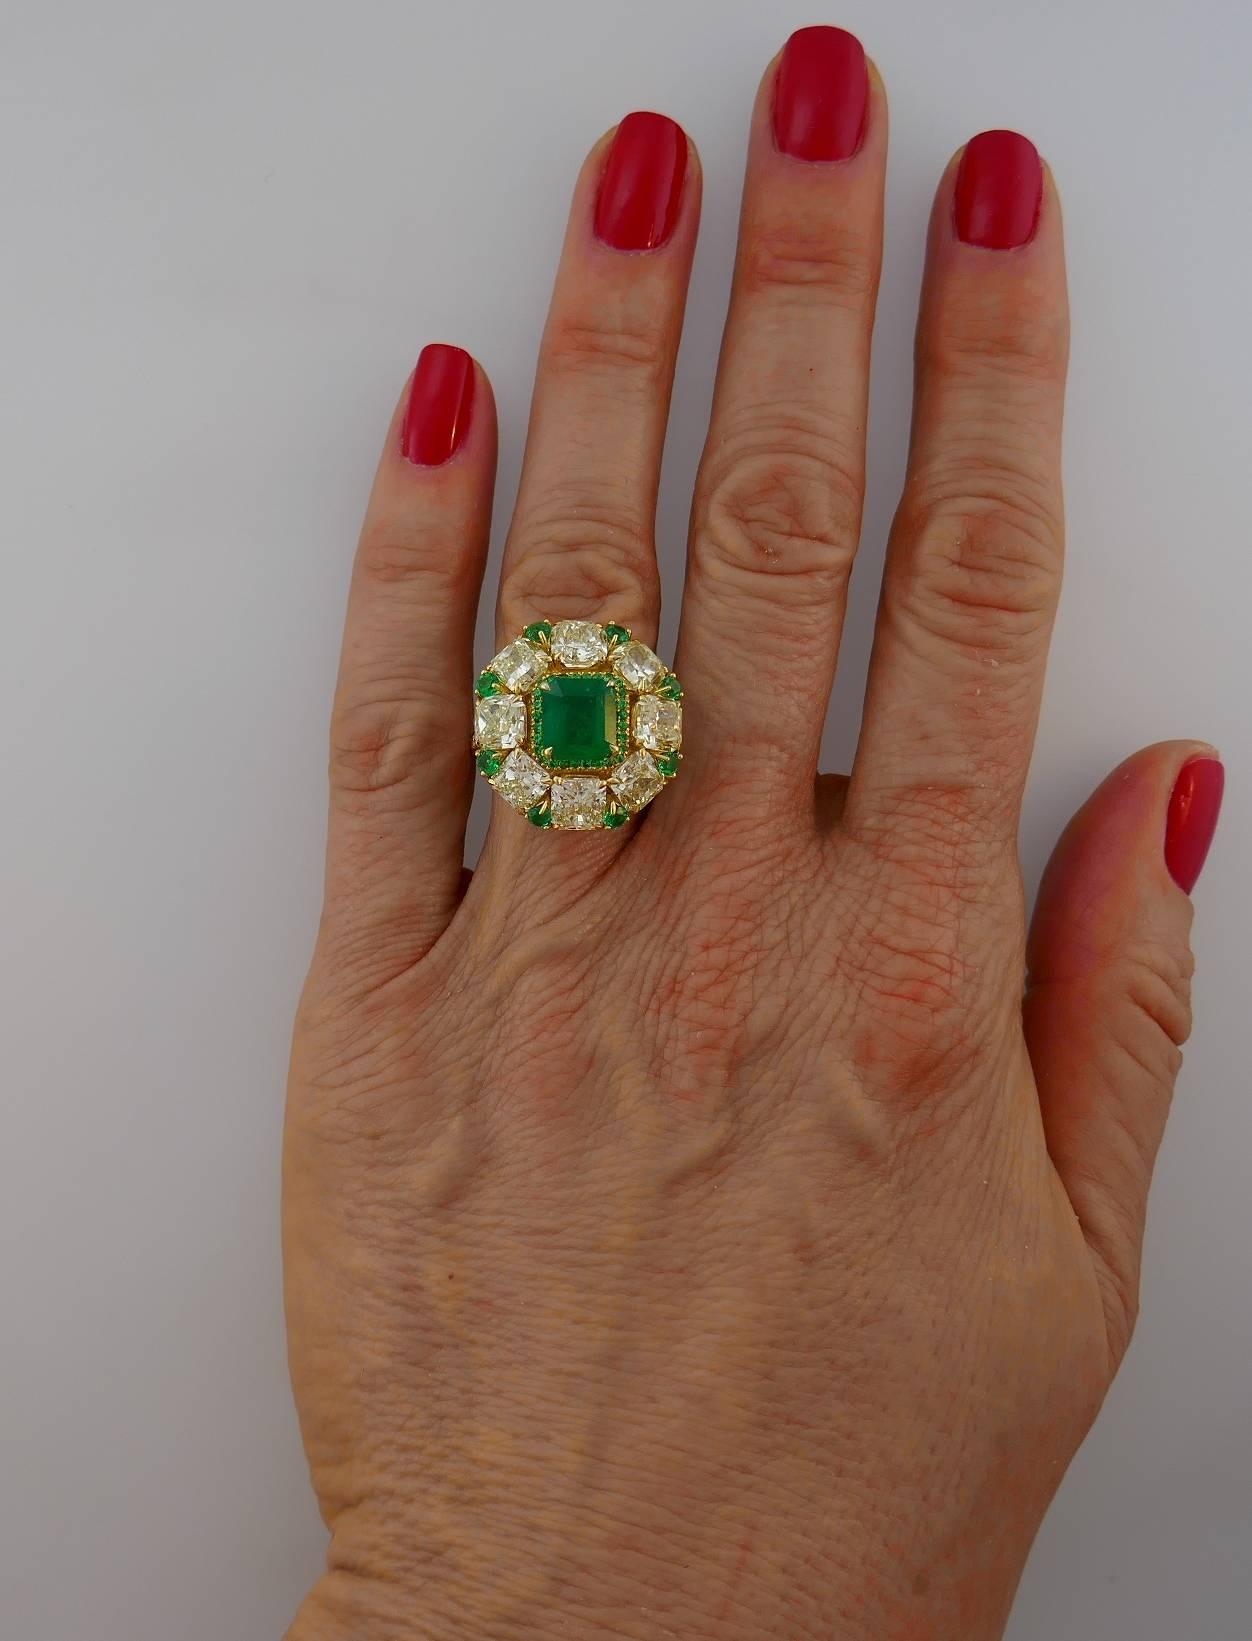 Sparkly and colorful cocktail ring that is a great addition to your jewelry collection.
It is made of 18 karat (stamped) yellow gold and features a gorgeous 2.24-carat finest color emerald framed with a row of eight light fancy yellow radiant cut